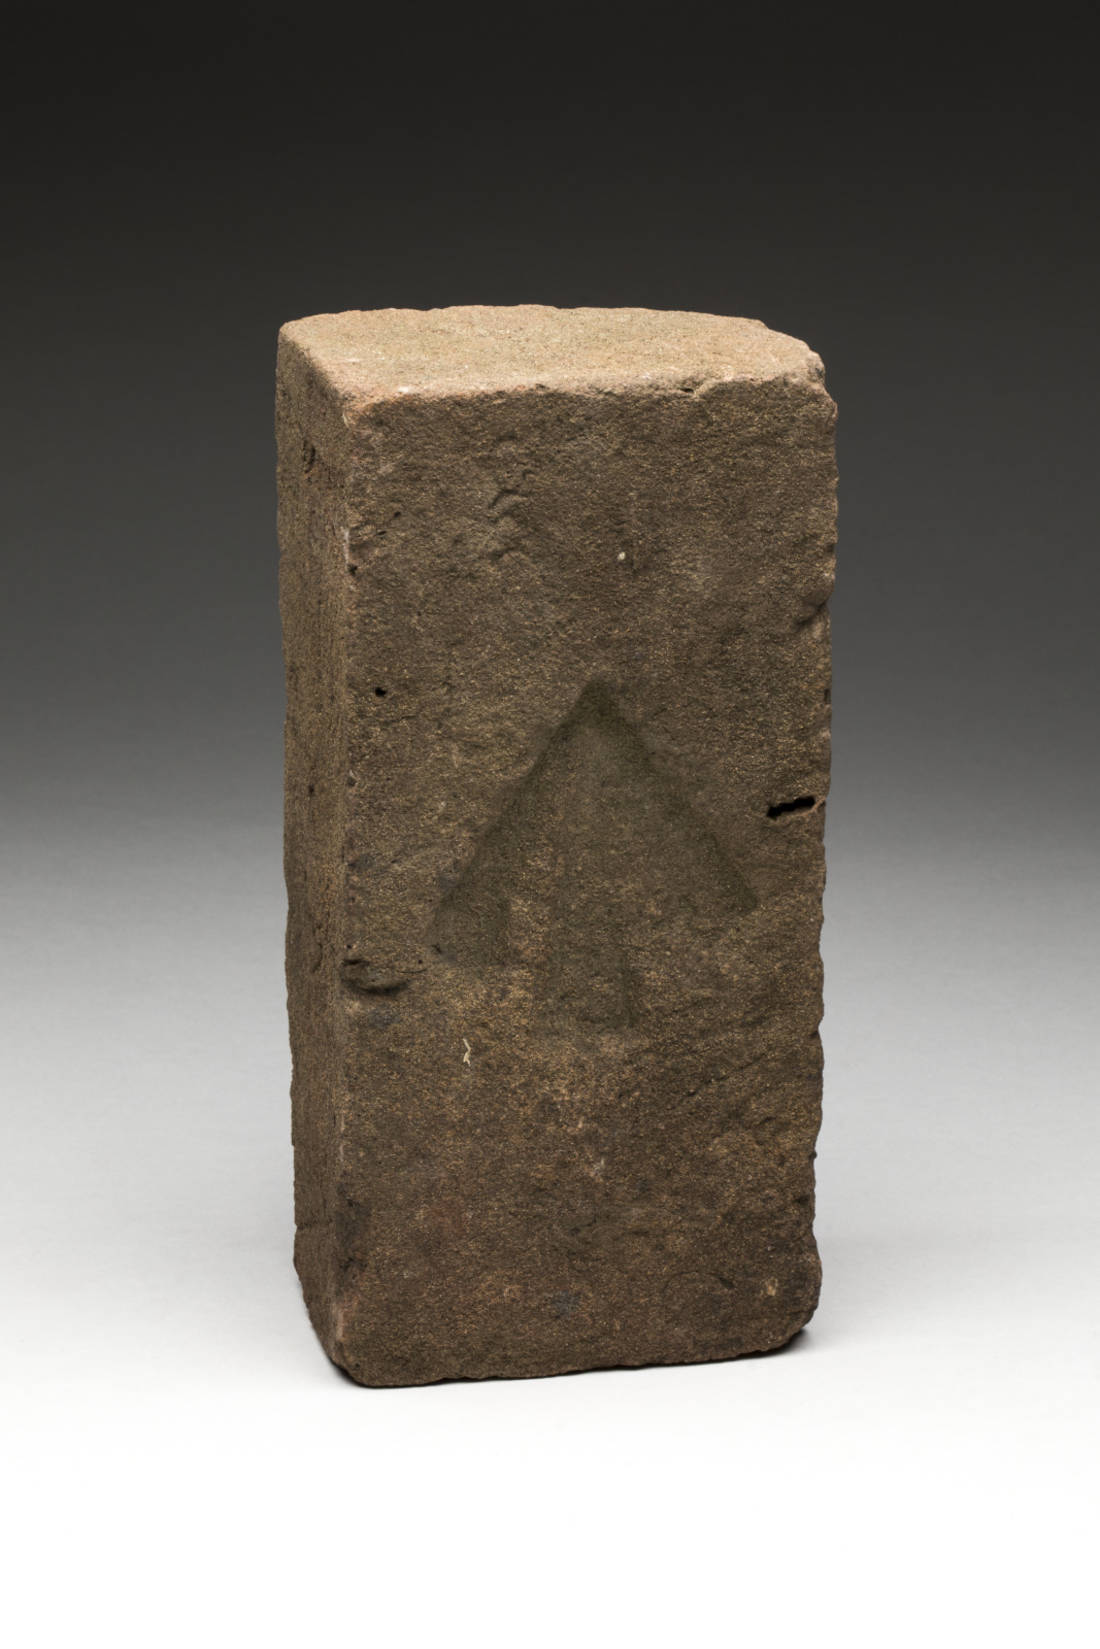 Convict-made brick with an arrow stamped in the centre of one face.